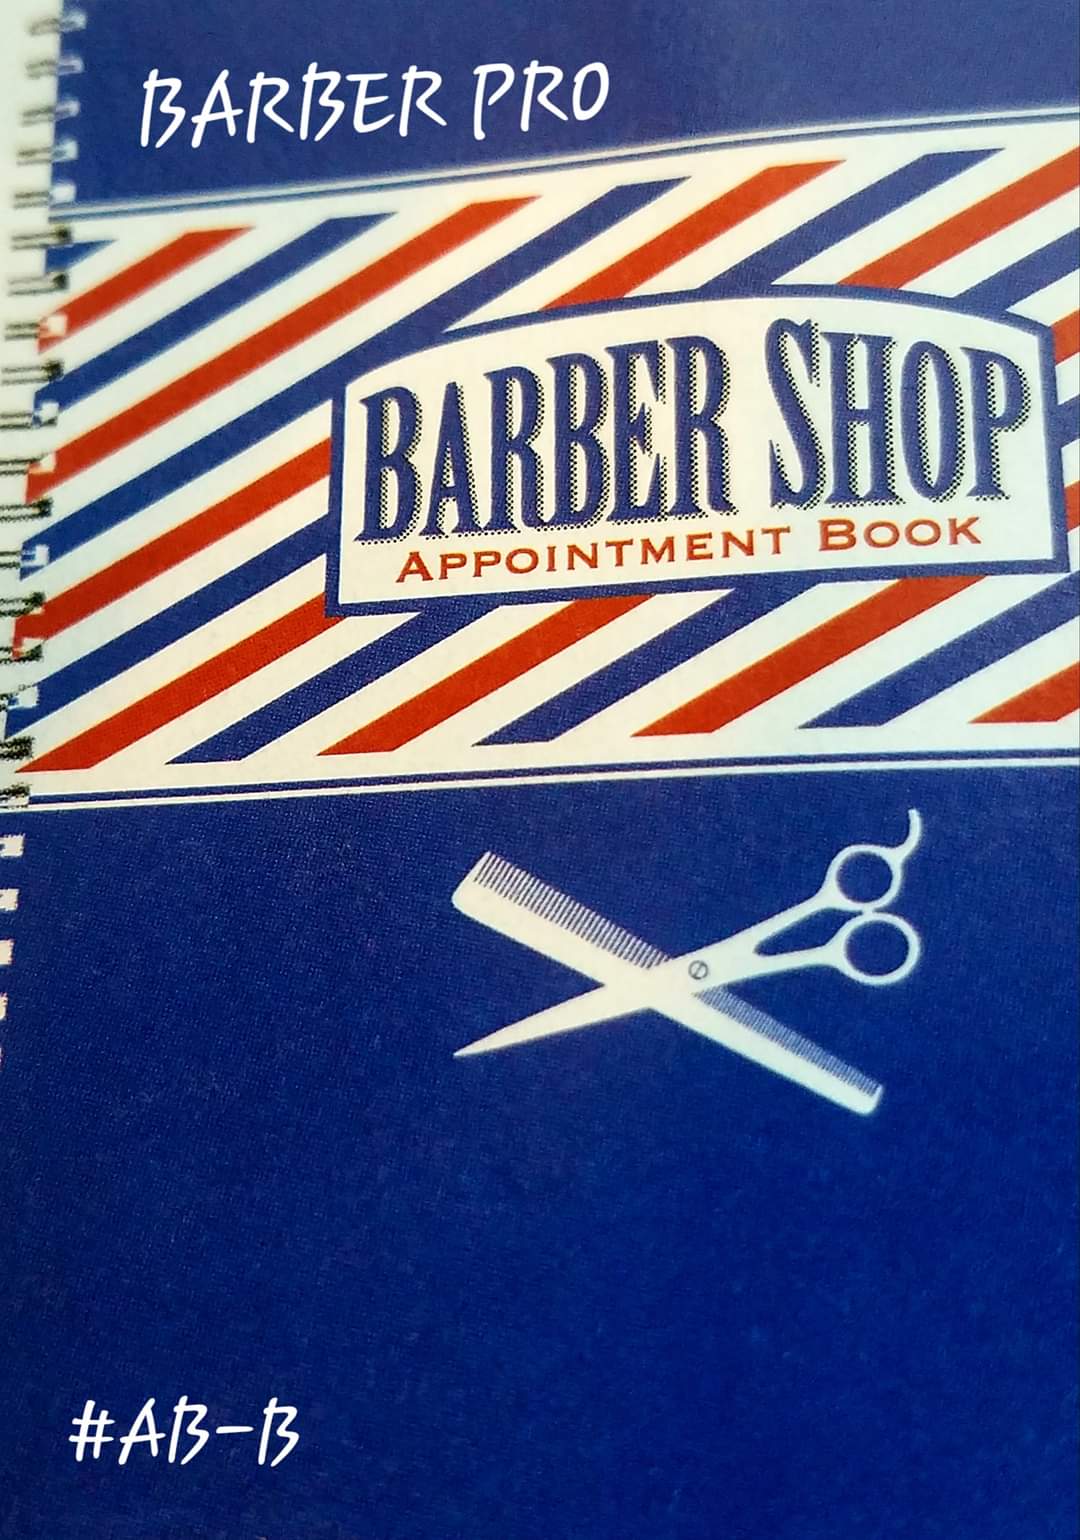 #AB-B BARBER PRO tm 3 COLUMN AND 8 HOUR APPOINTMENT BOOK FROM POLLY-PRODUCTS.COM 